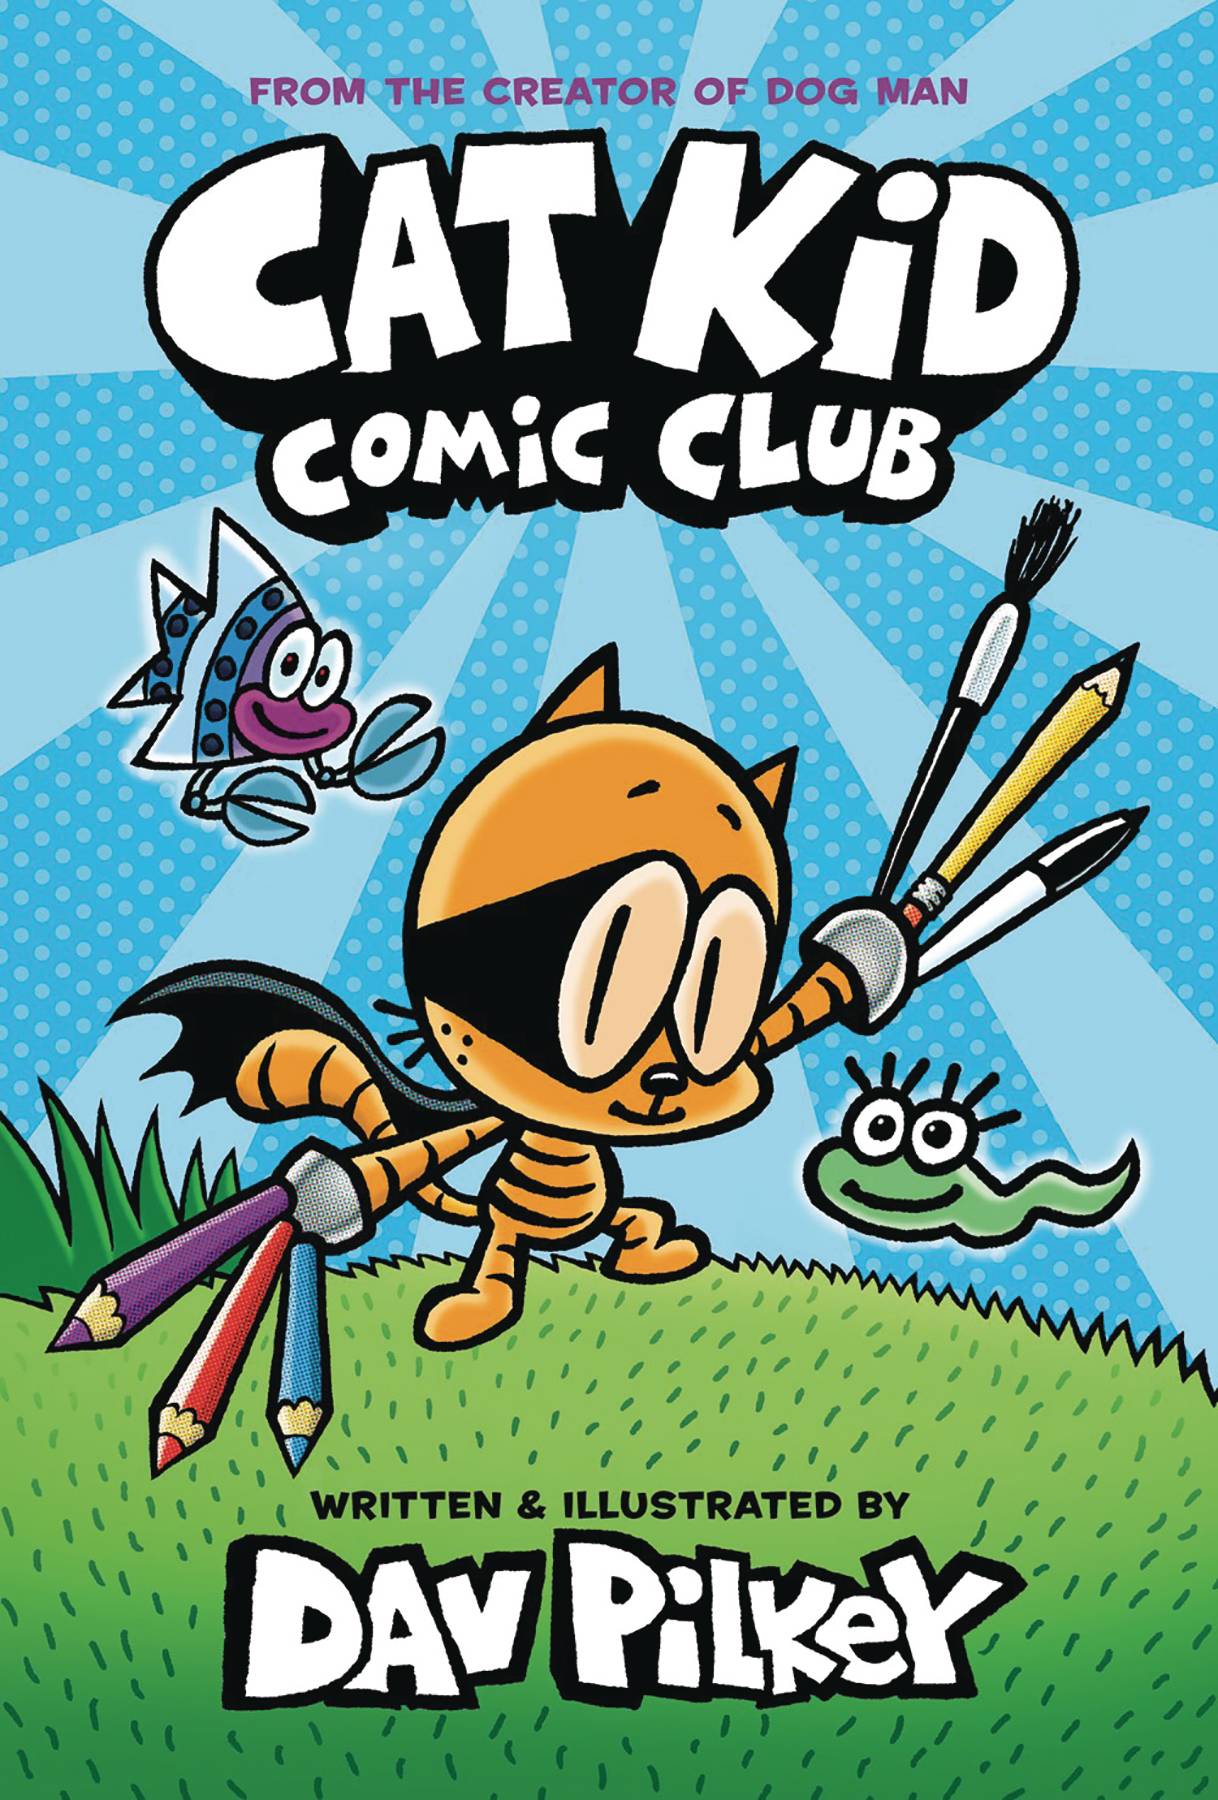 An orange cartoon cat wearing a mask and cape wields a variety of art materials in their hands. They stand on a grassy mound with a bright blue sky behind them. A robotic fish with pincers and a snake with long eyelashes float in the background, looking hand-drawn.